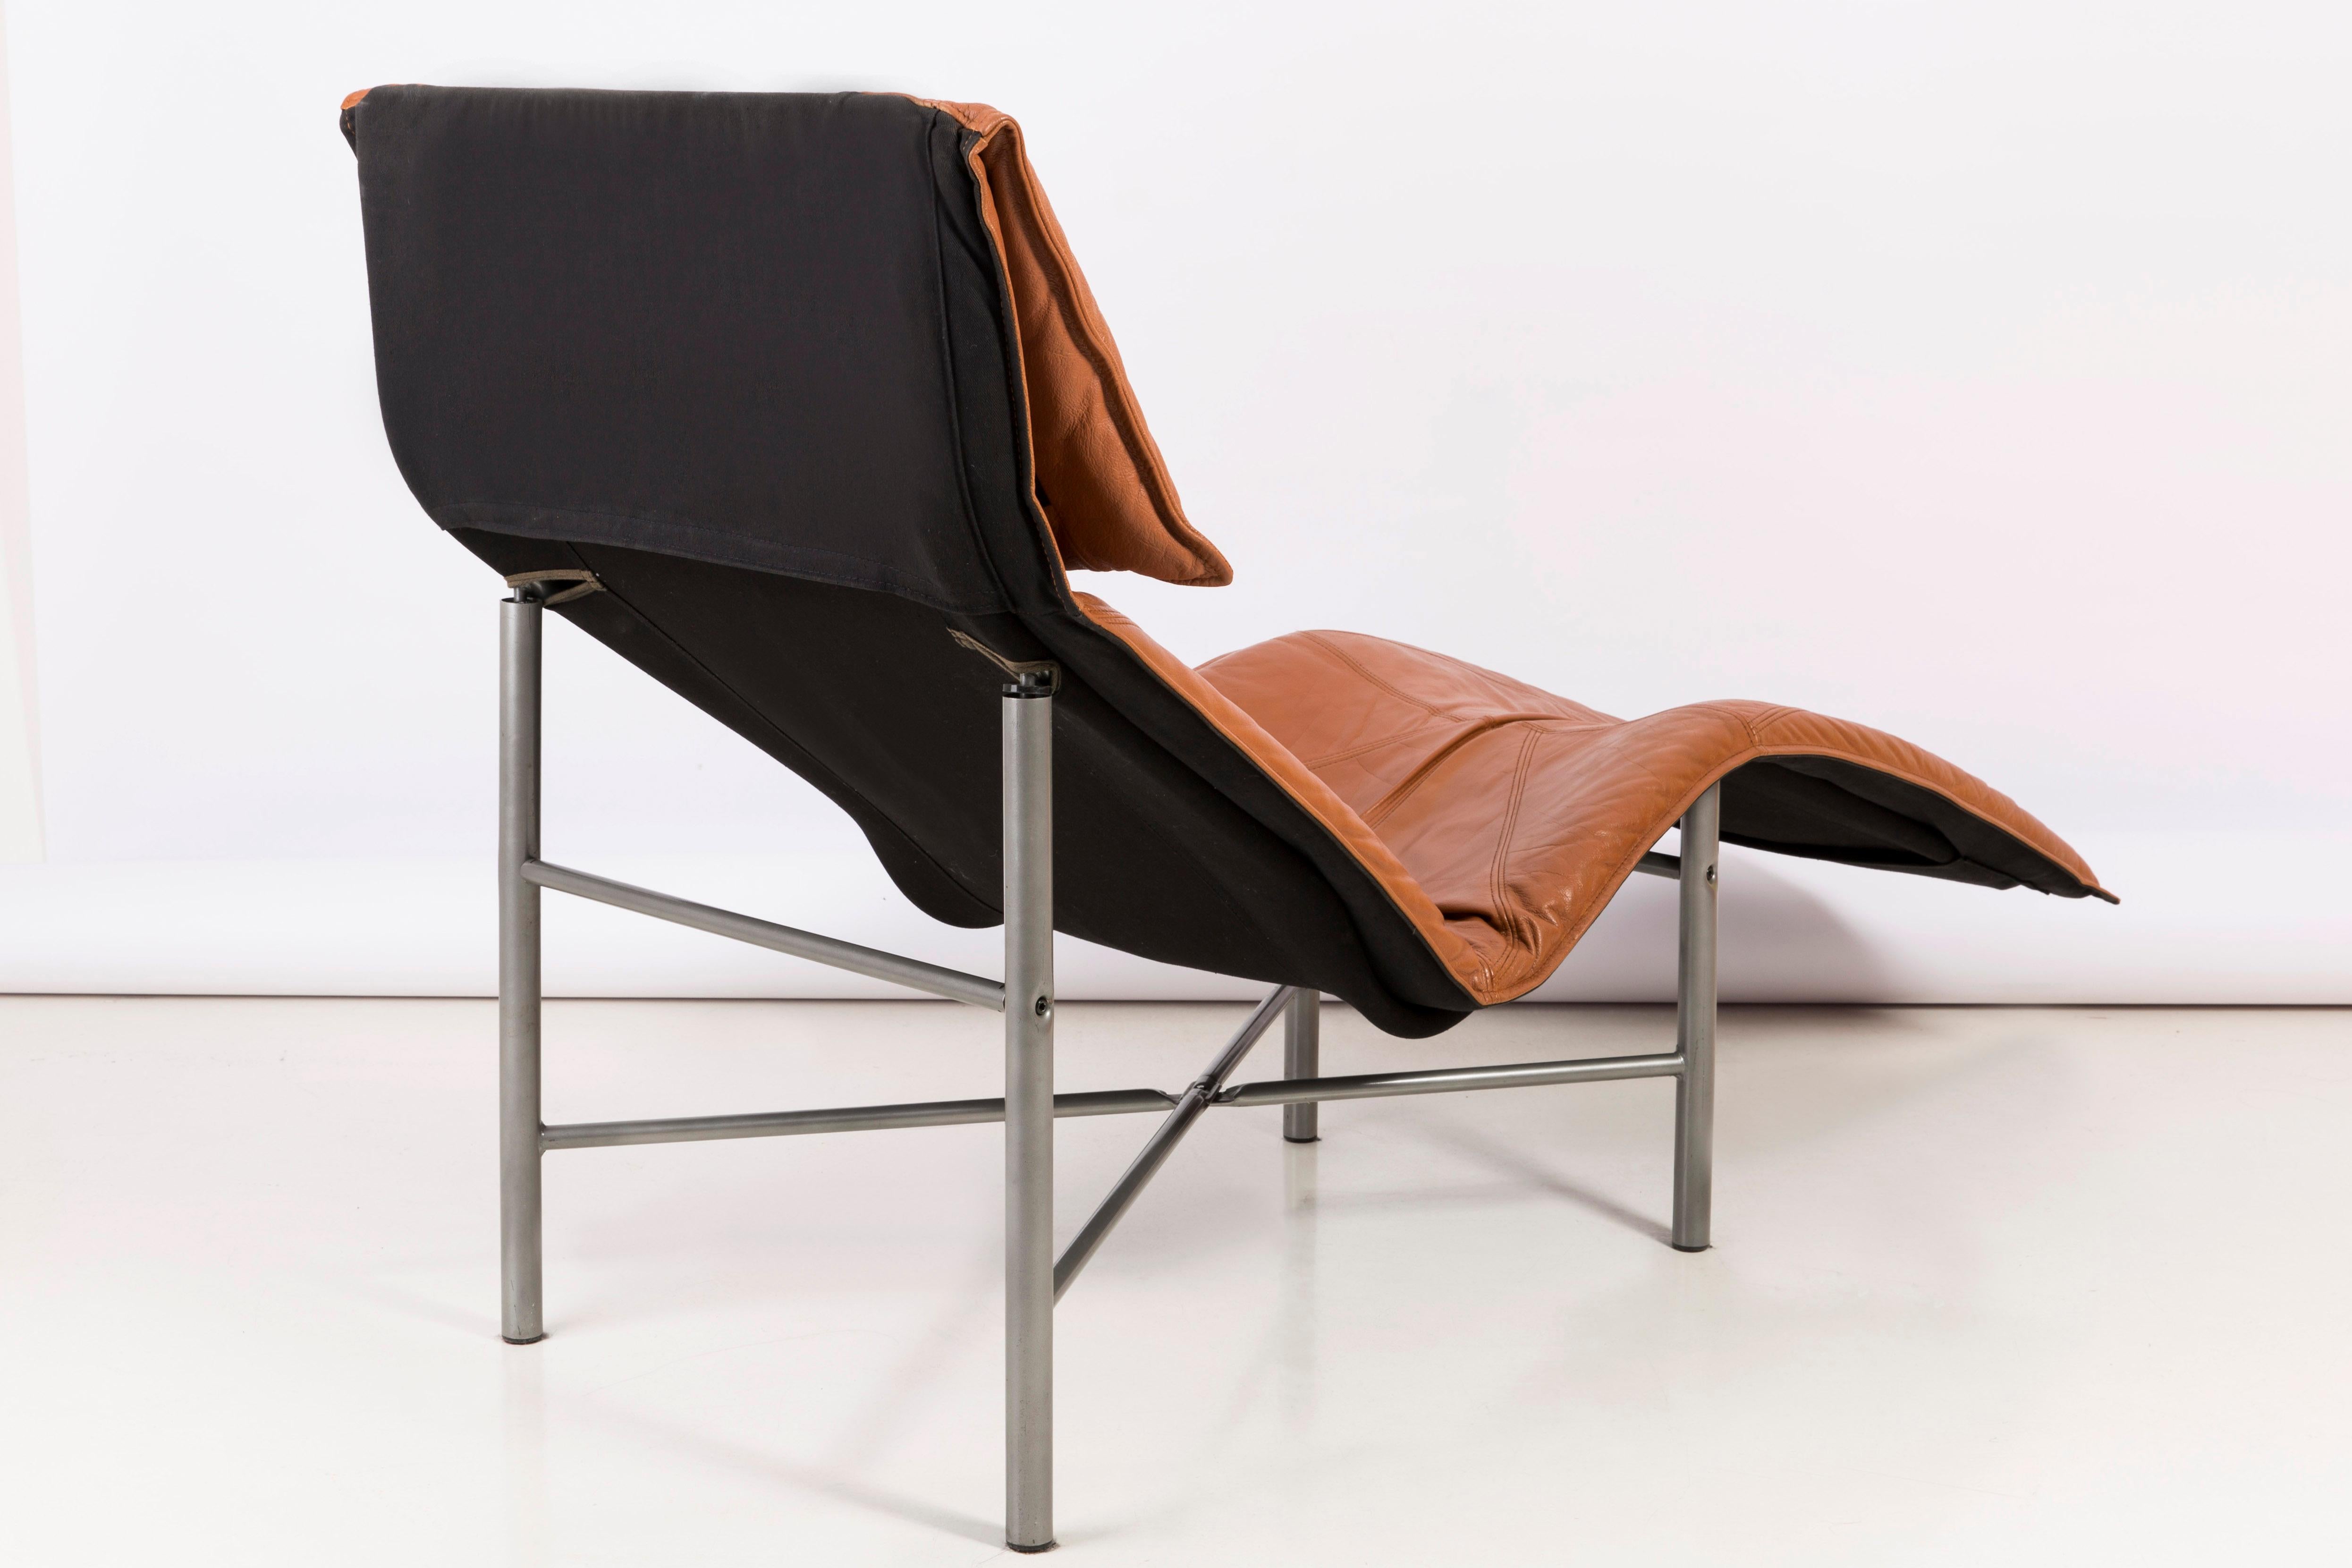 Swedish Midcentury Danish Modern Brown Leather Chaise Lounge Chair by Tord Björklund For Sale